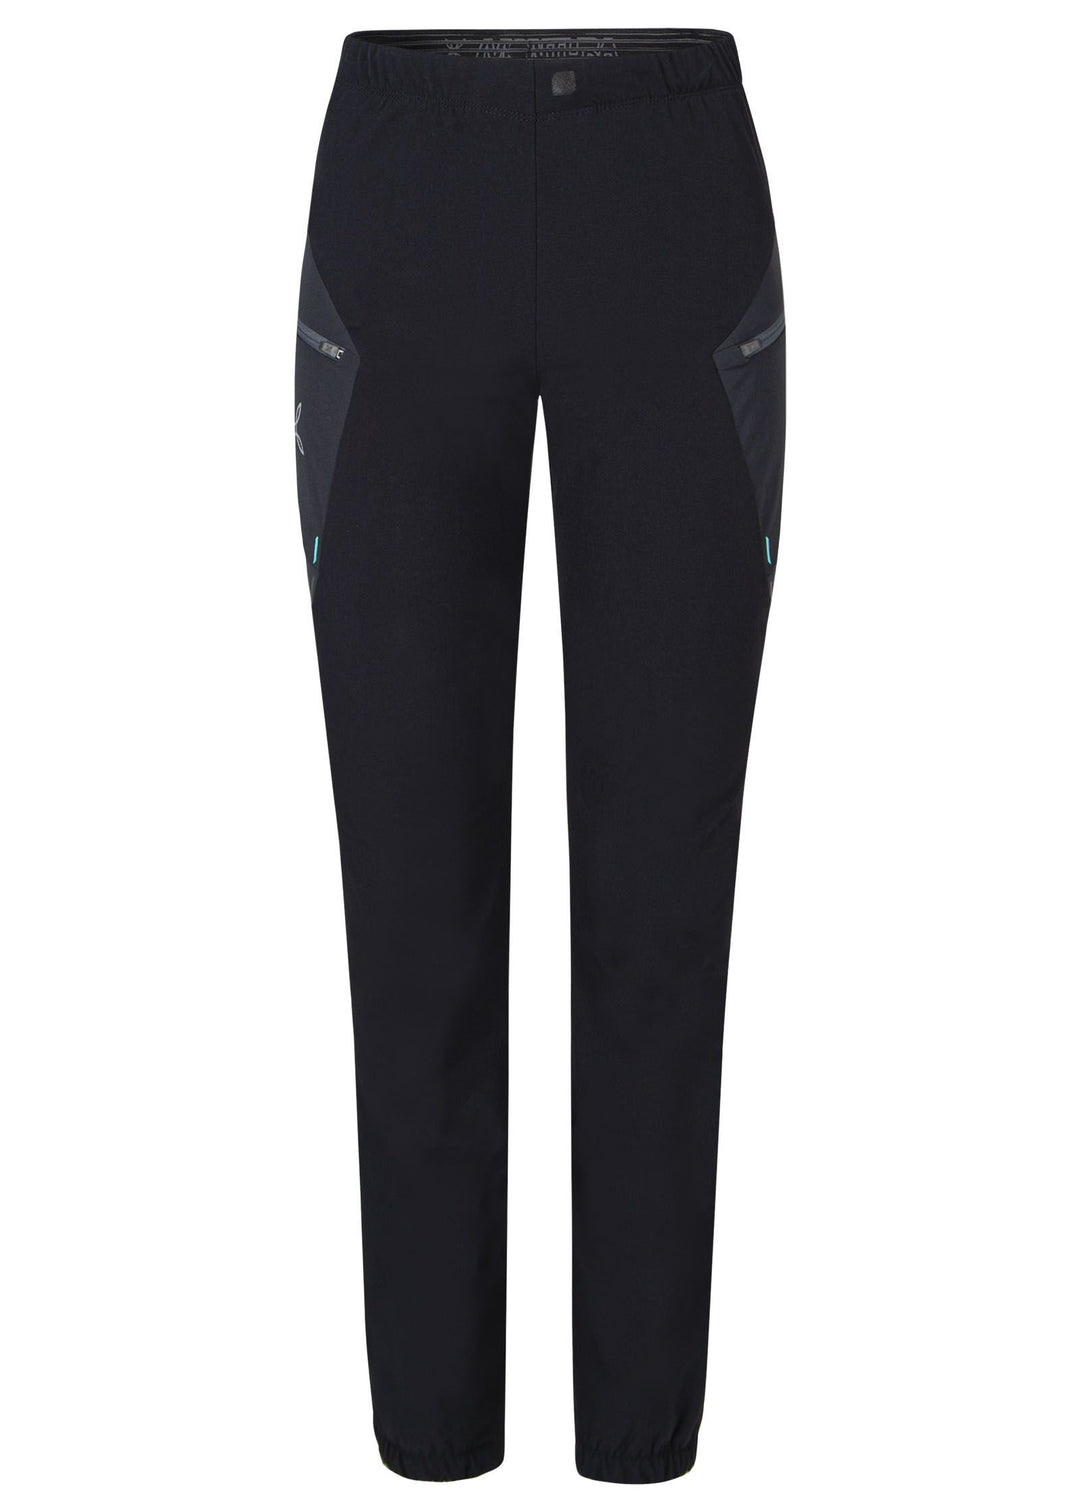 Speed Style Pants Woman - Antracite/Intense Violet (9207) - Blogside